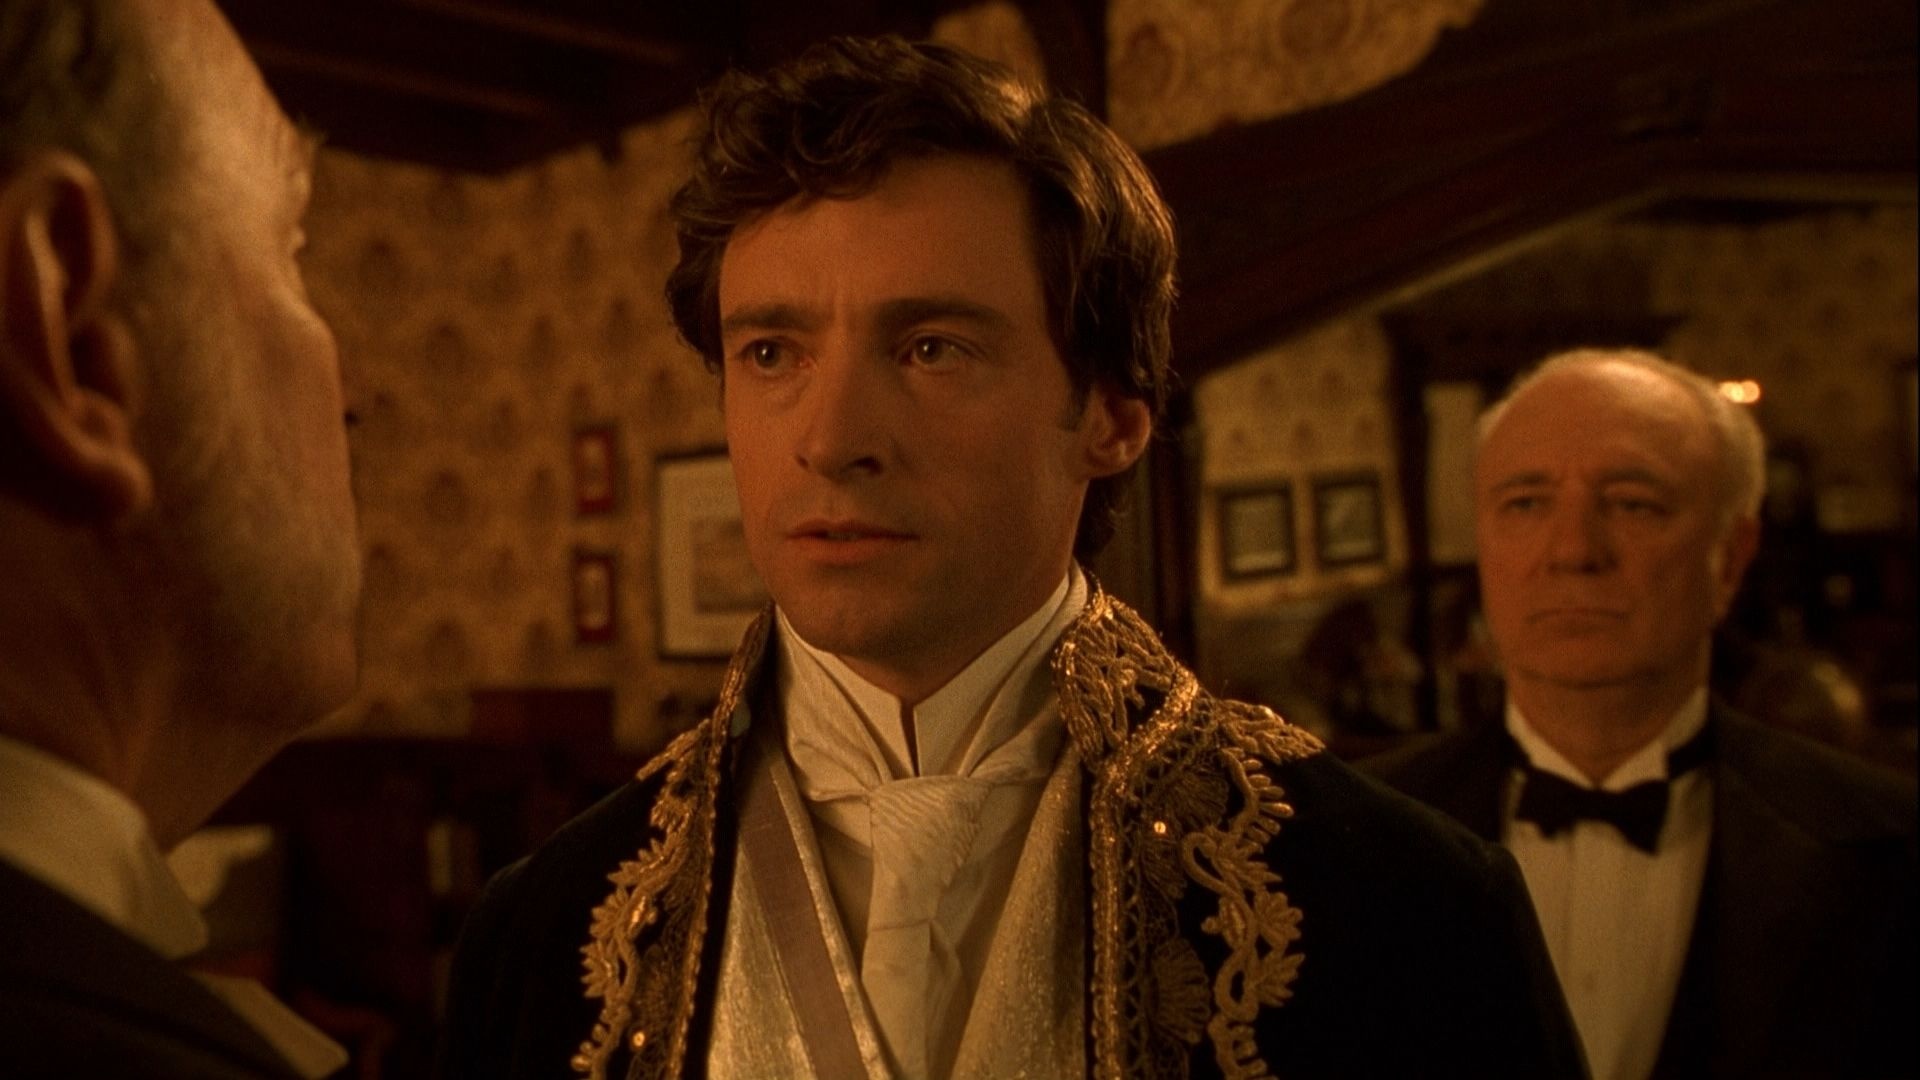 Kate and Leopold: Hugh Jackman as His Grace the 3rd Duke of Albany, 2001 movie. 1920x1080 Full HD Background.